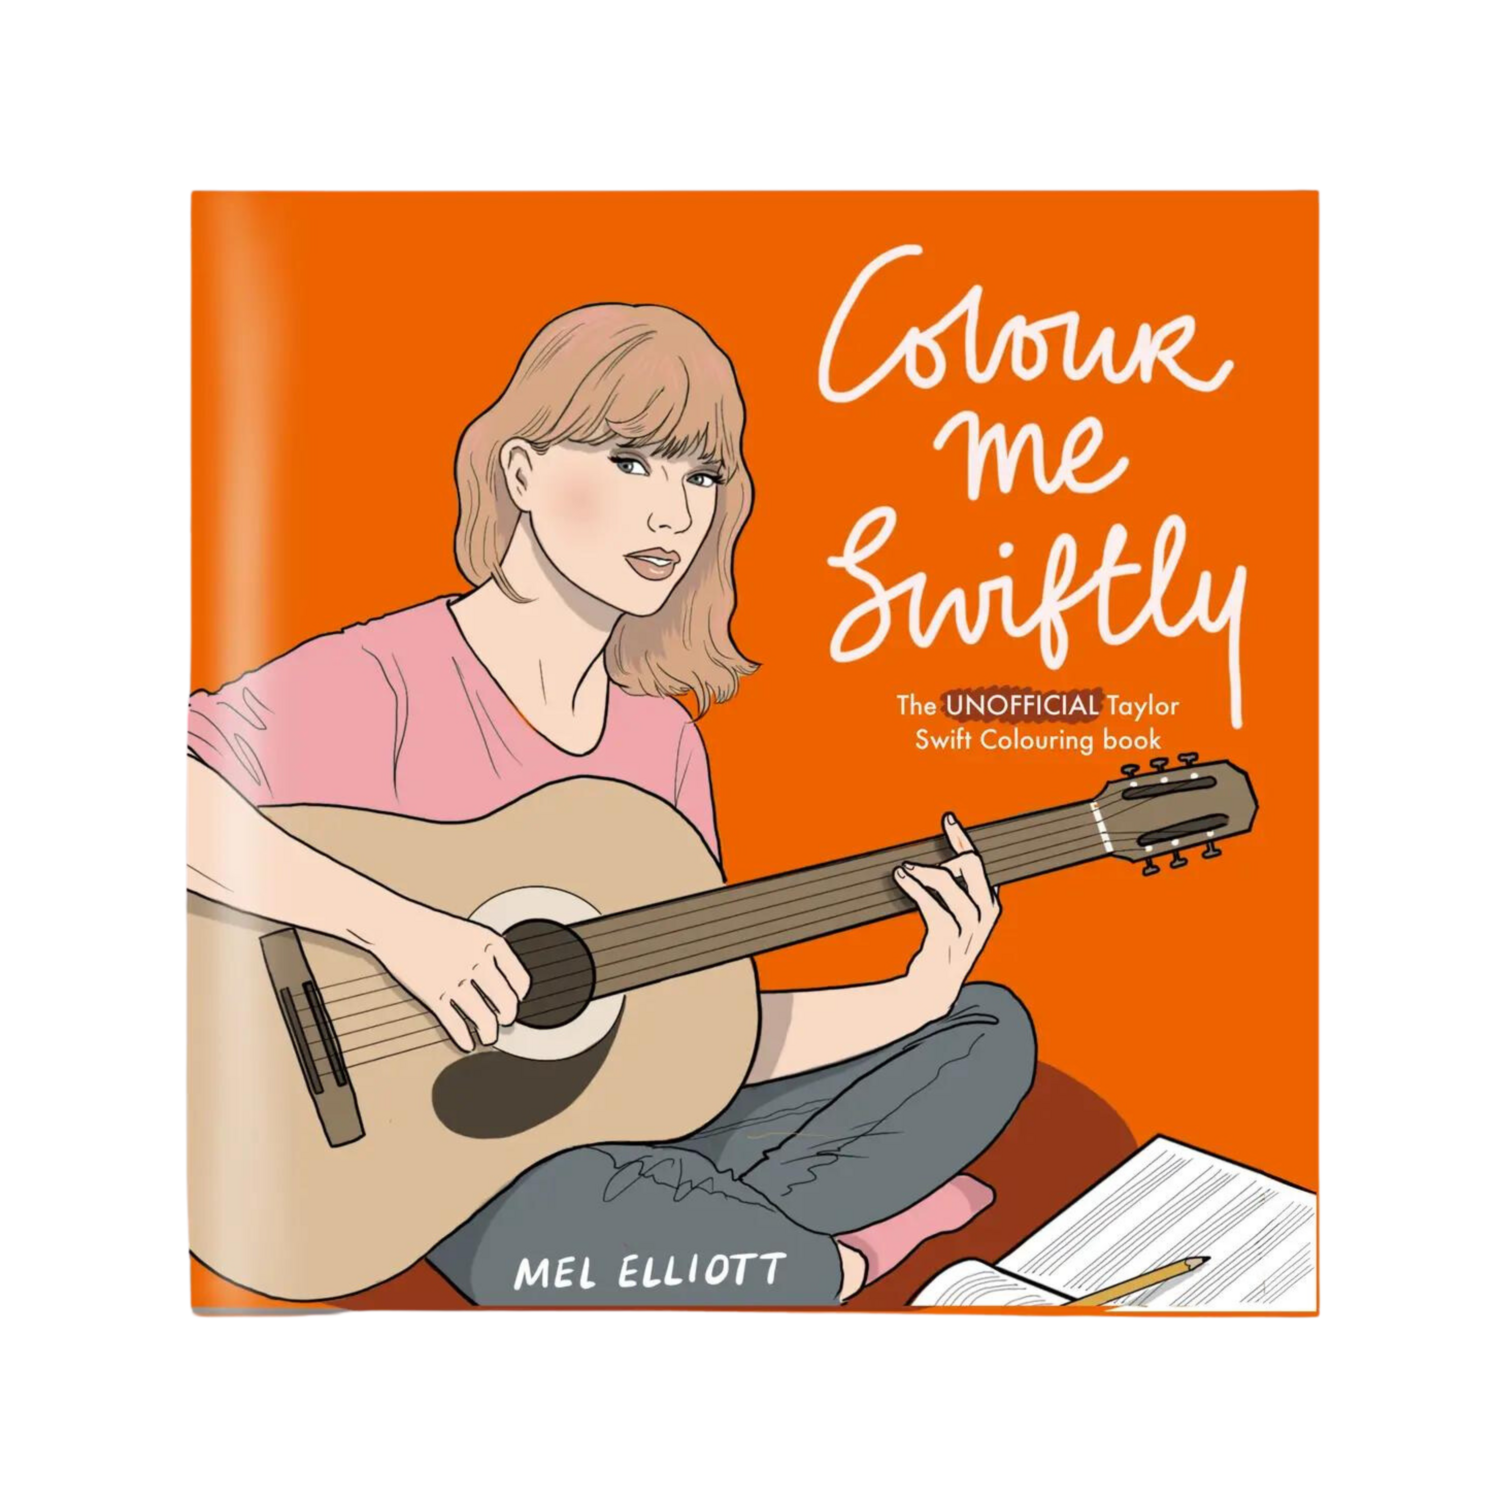 TAYLOR SWIFT COLORING BOOK